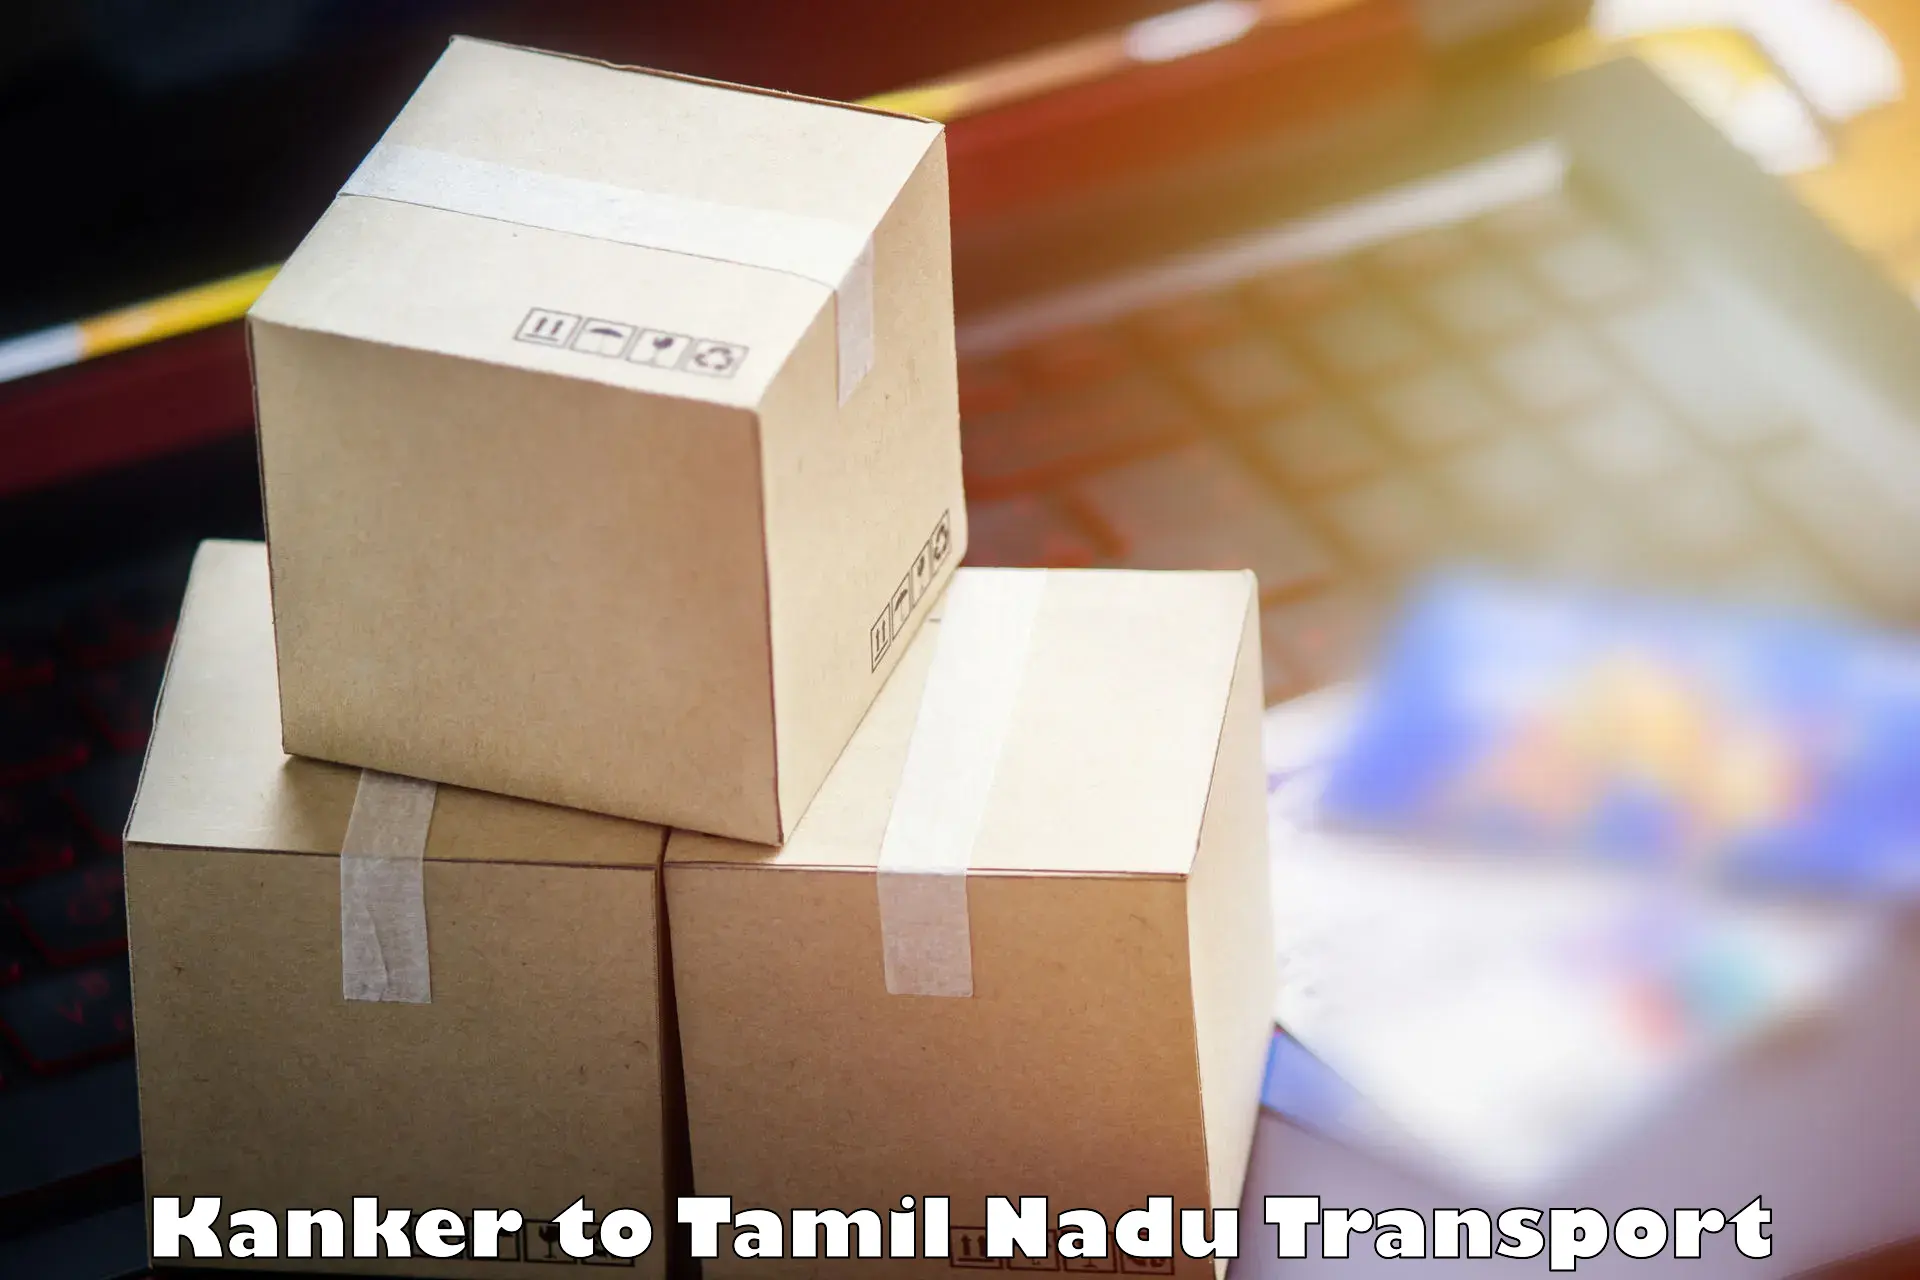 Shipping services in Kanker to Melmaruvathur